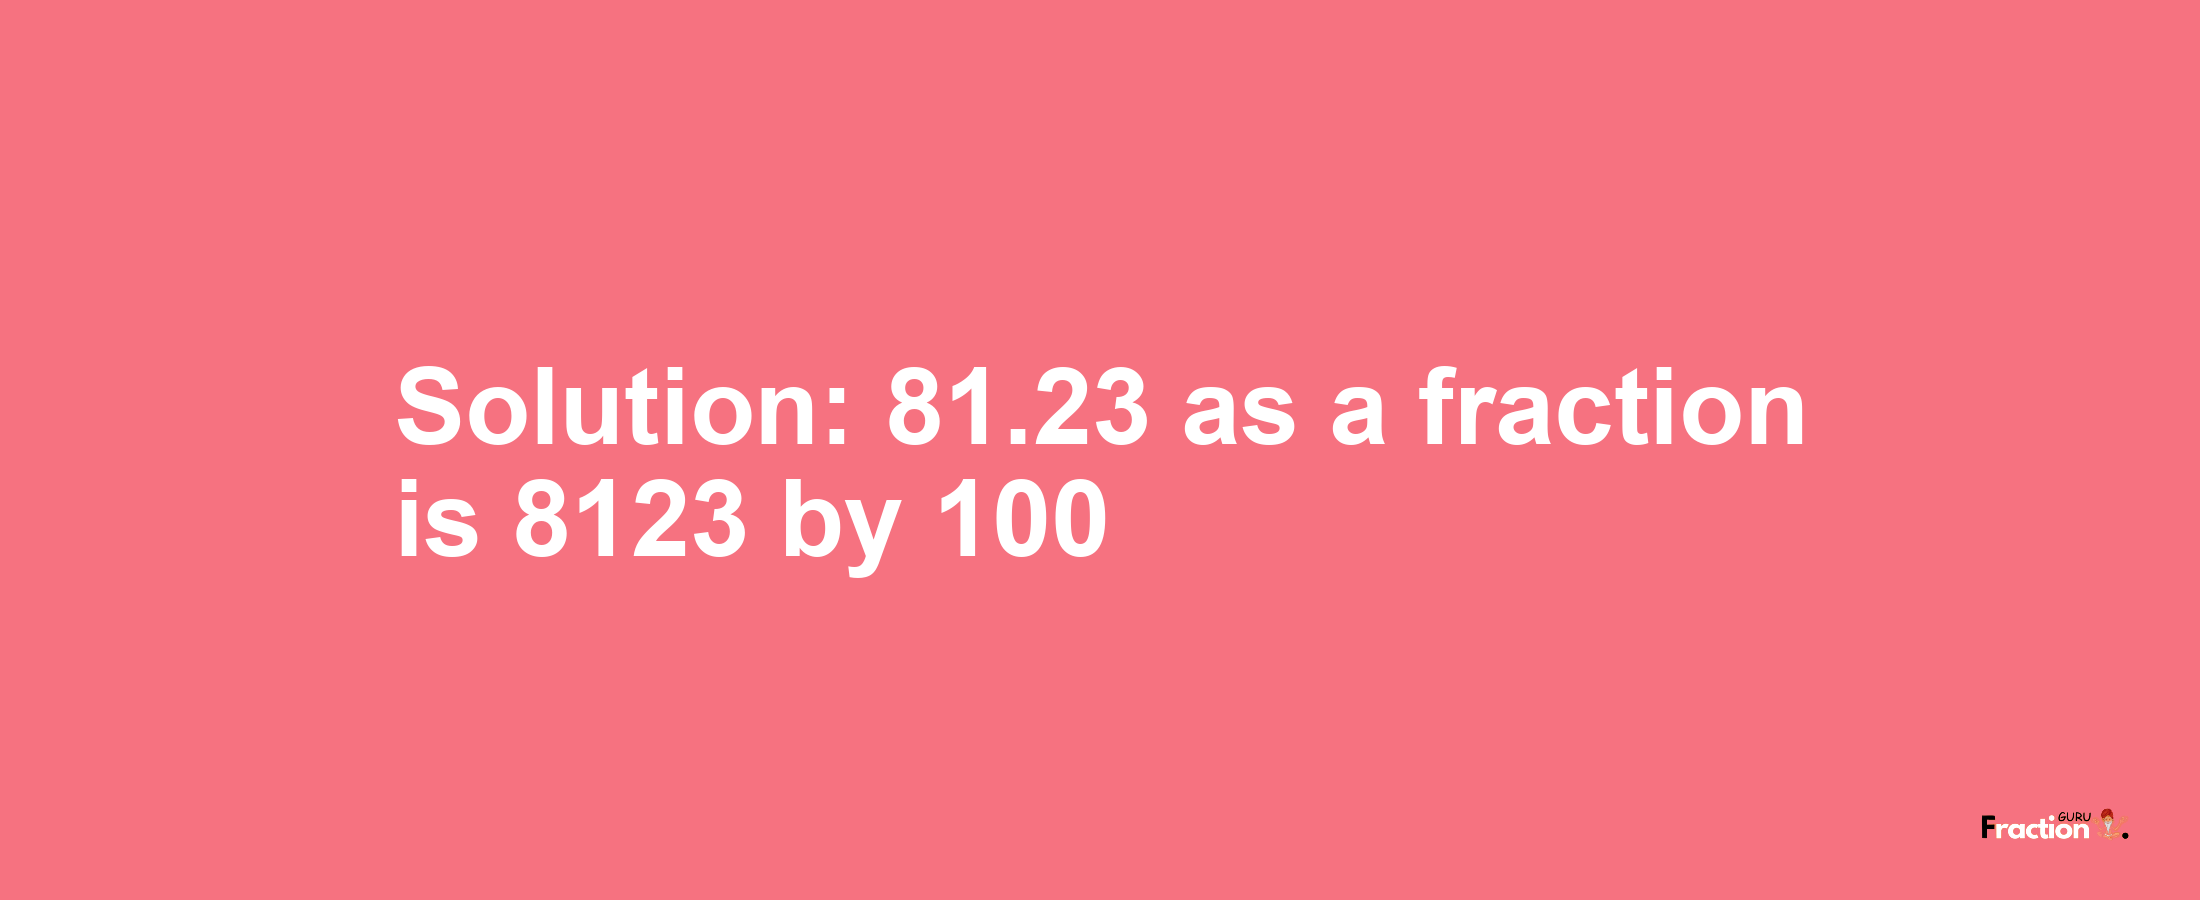 Solution:81.23 as a fraction is 8123/100